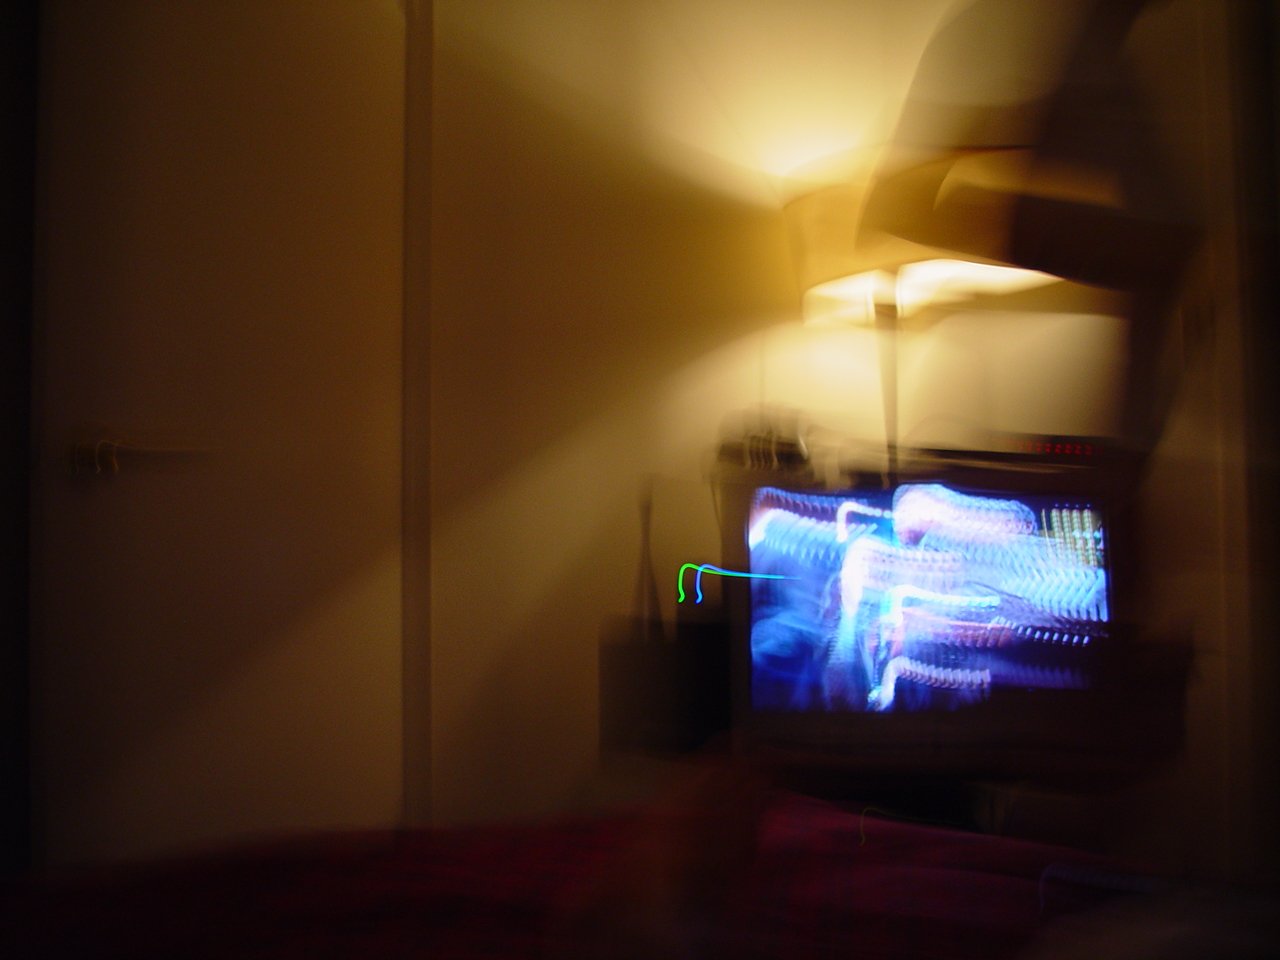 blurry pograph of a living room with television